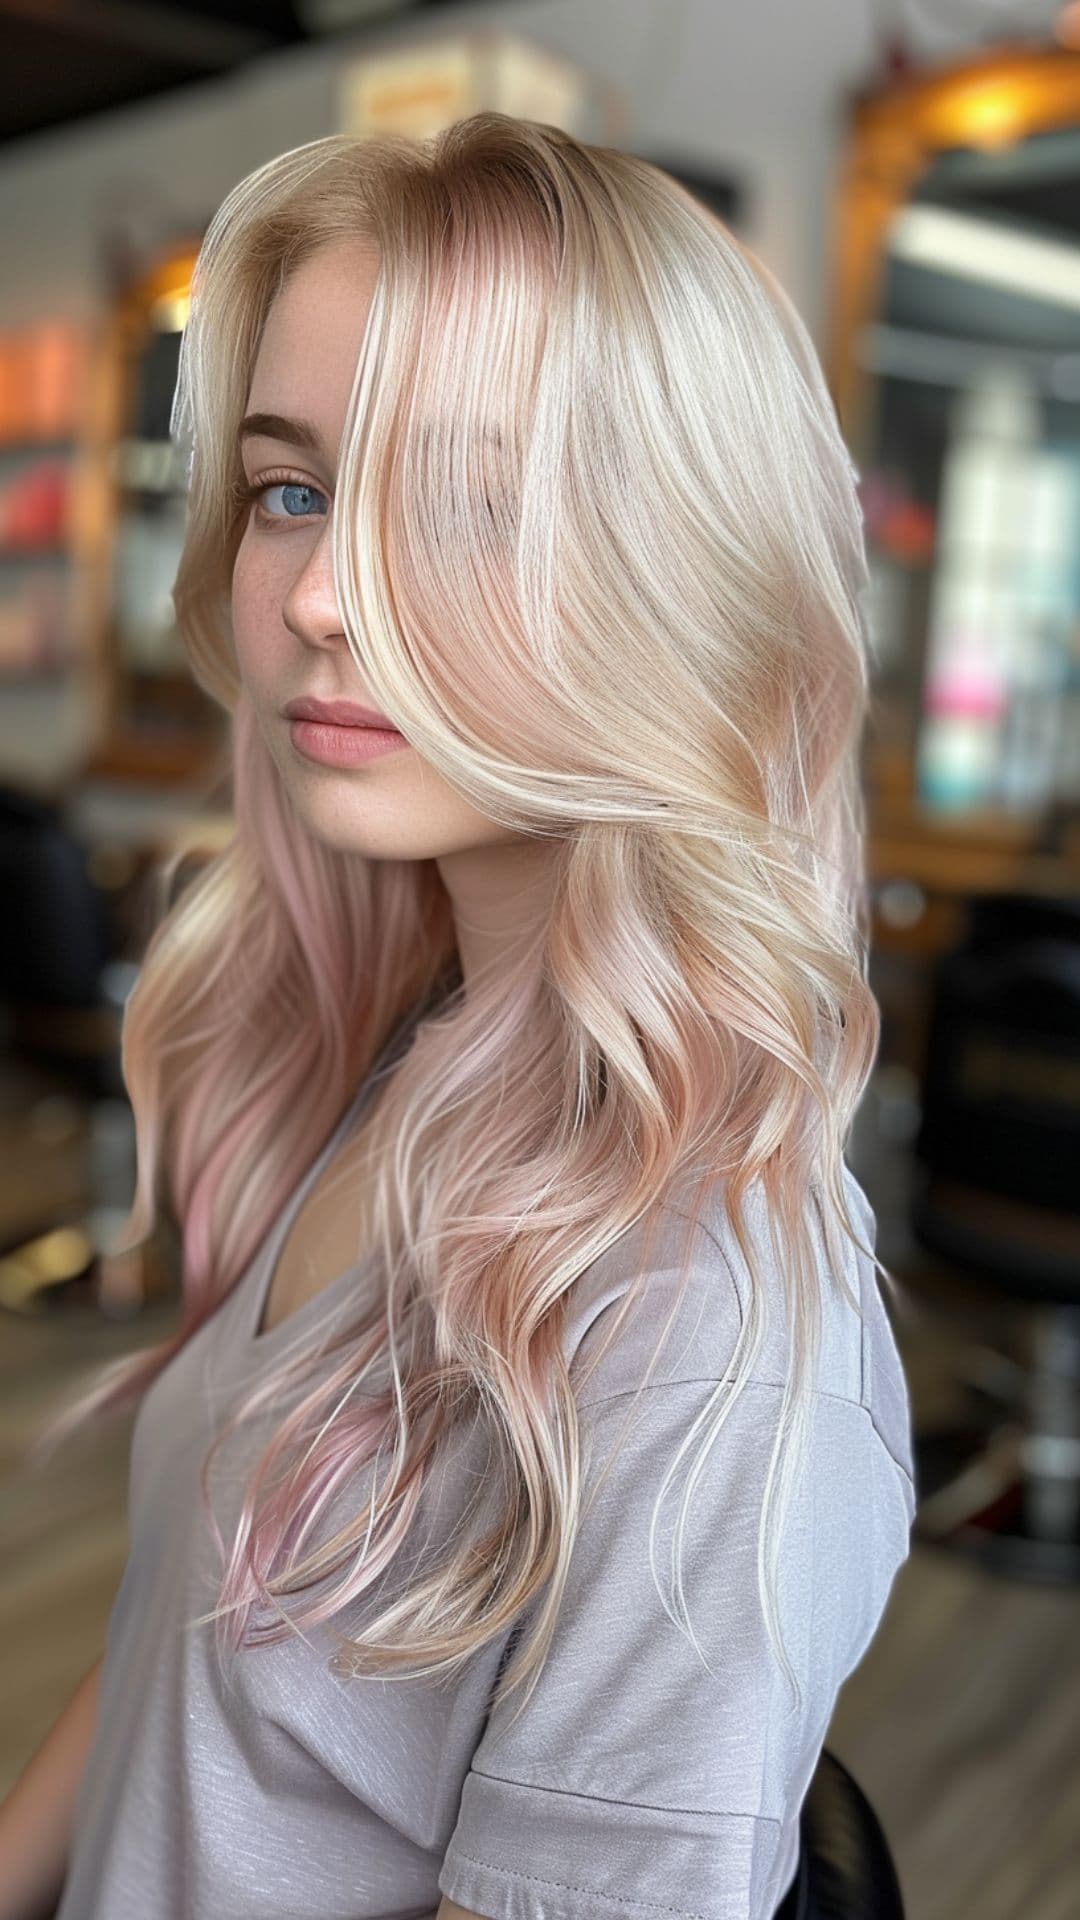 A young woman modelling a blush blonde hair.